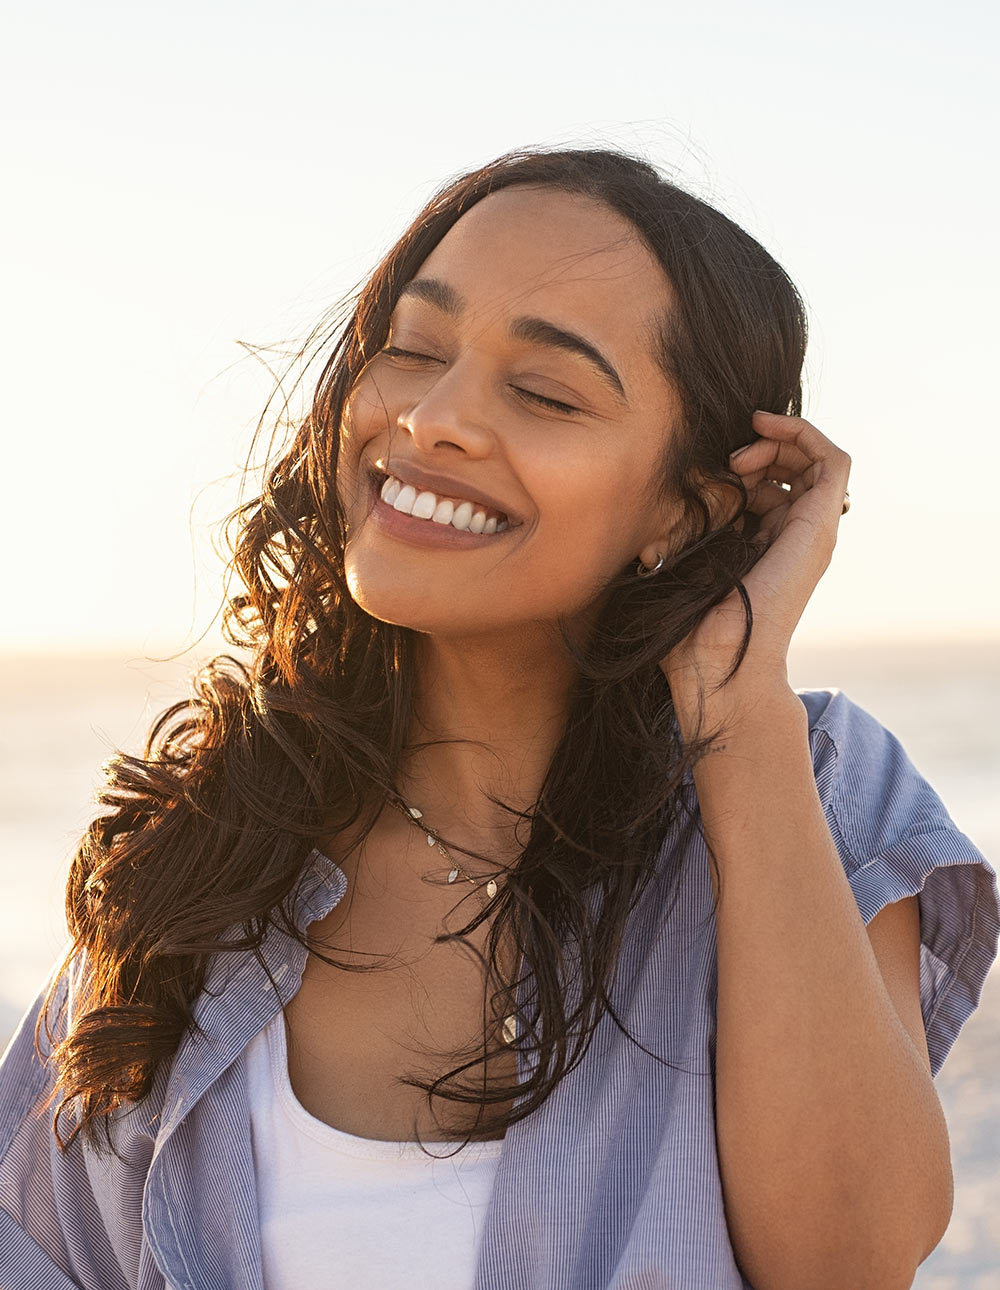 Image of a smiling woman closing her eyes and tucking her hair behind her ear while standing on the beach. Uncover a positive way to manage your trauma with EMDR therapy in Birmingham, AL.